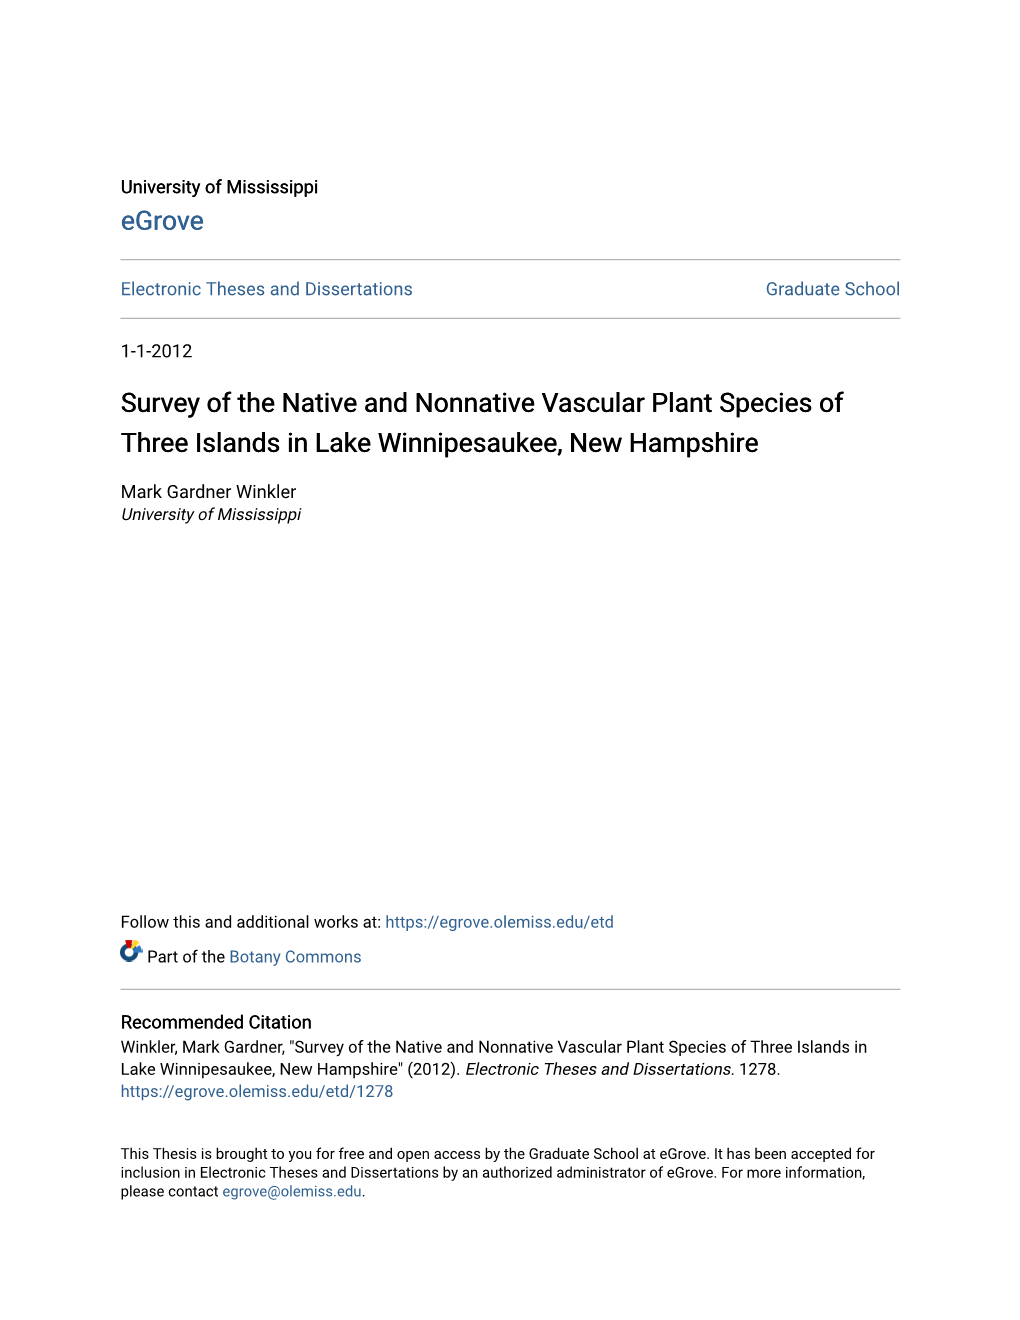 Survey of the Native and Nonnative Vascular Plant Species of Three Islands in Lake Winnipesaukee, New Hampshire